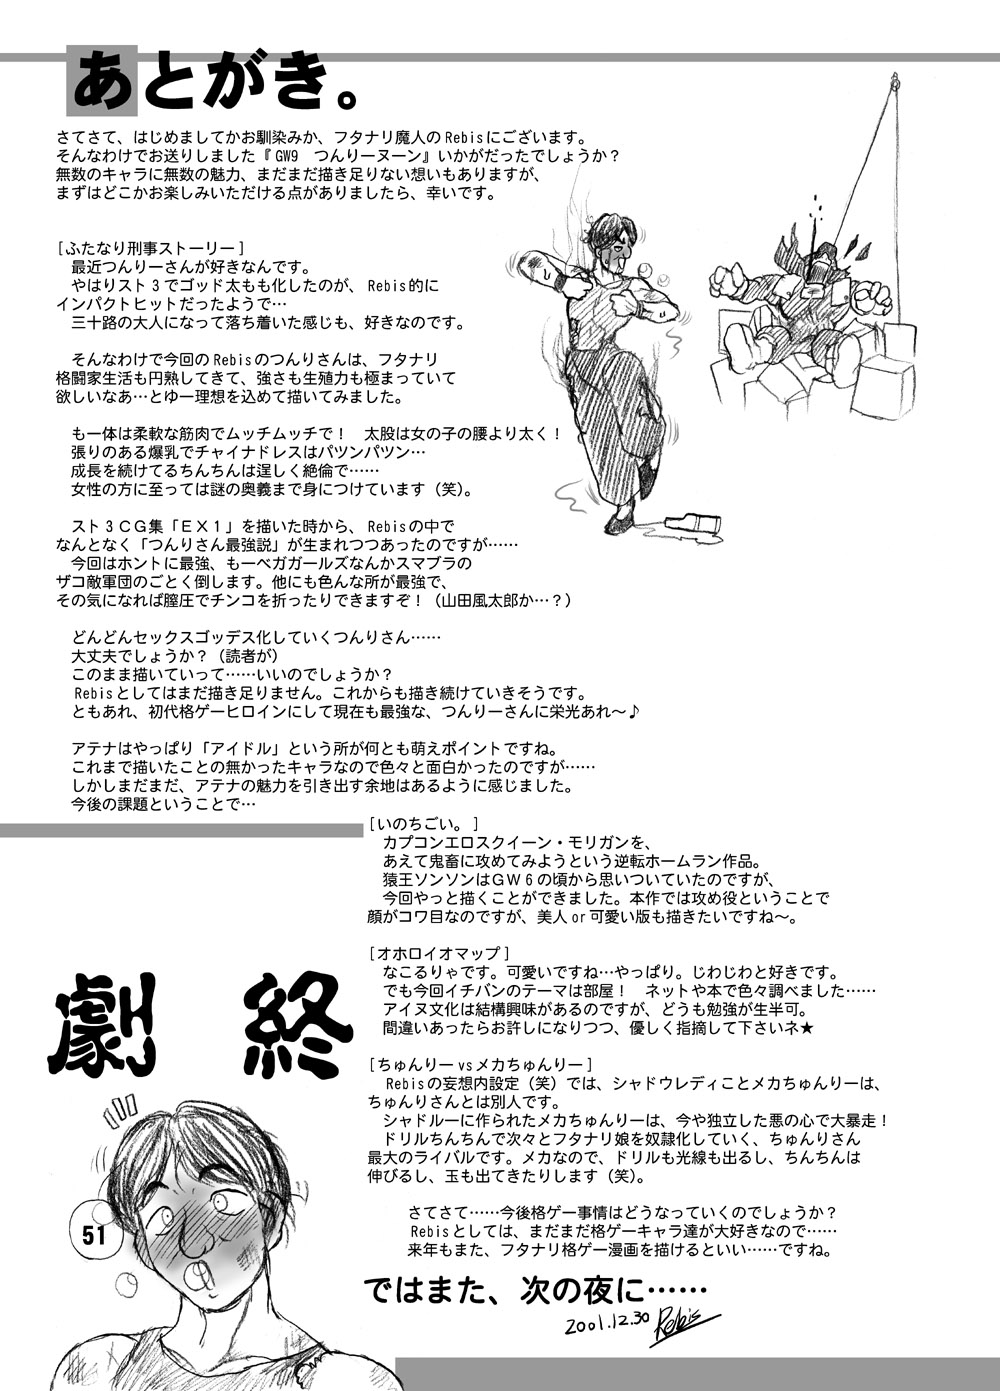 (C61) [Arsenothelus (Rebis)] TsunLee Noon - The Great Work of Alchemy 9 (Street Fighter) page 47 full